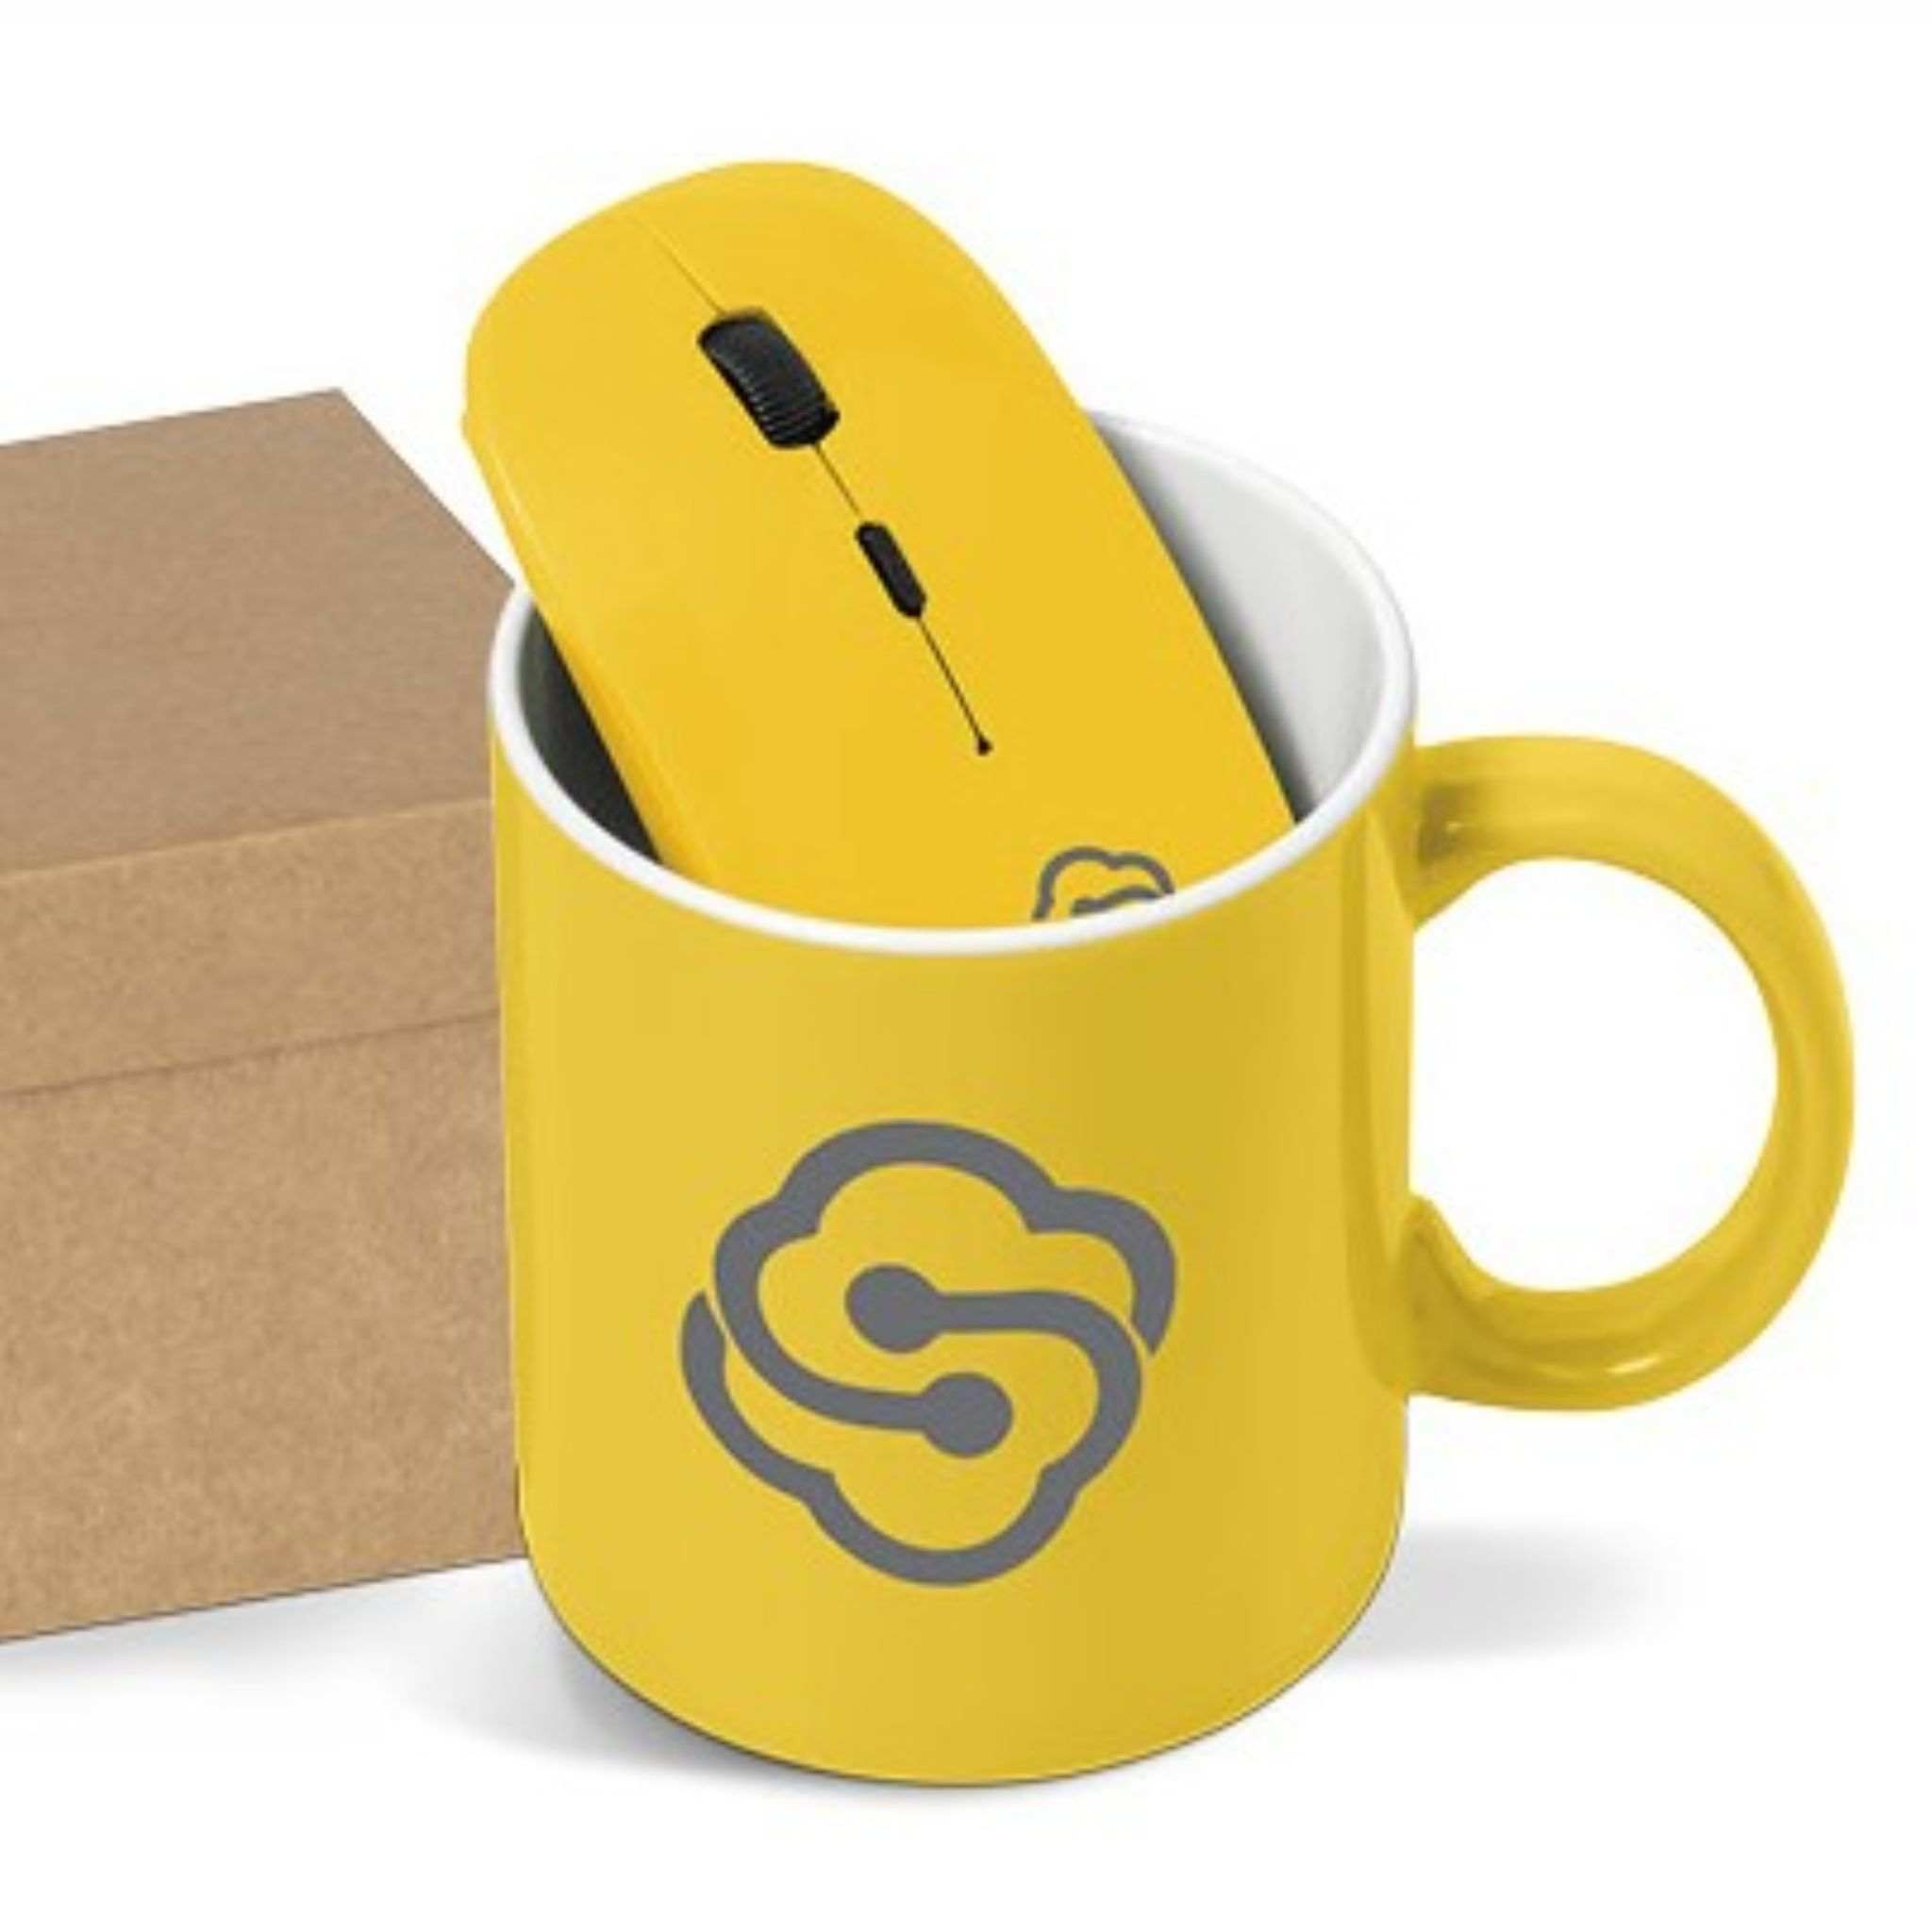 On The Desk Gift Set-Drinkware Sets-Yellow-Y